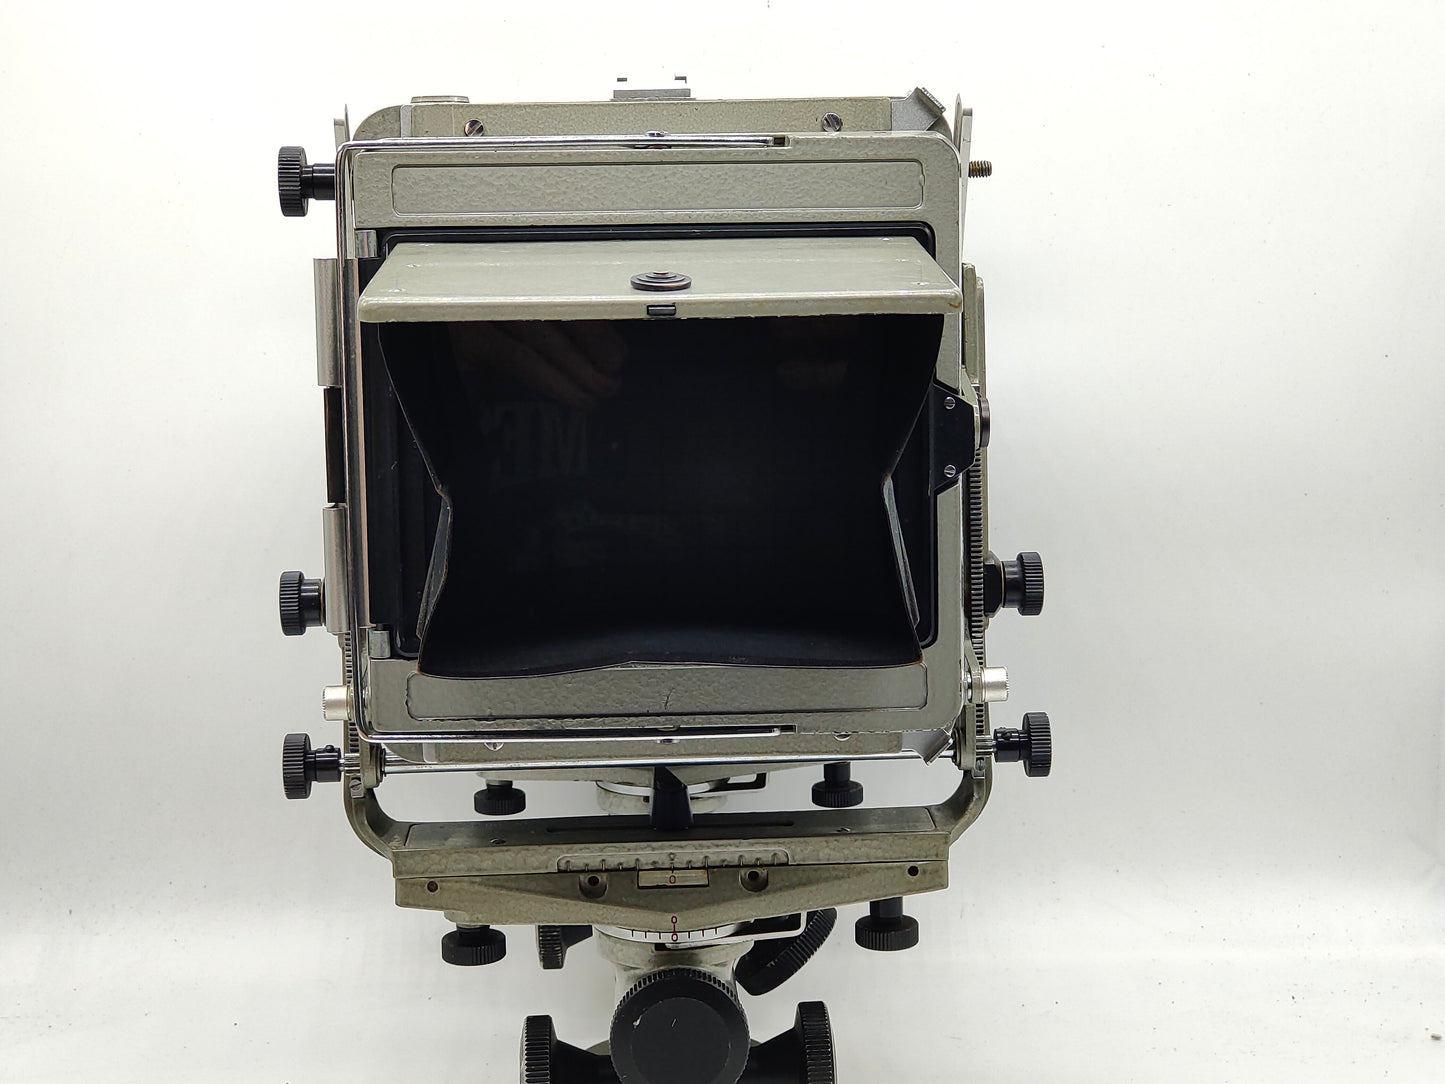 Toyo View Deluxe 4x5 large format camera with Fujinon 150mm lens